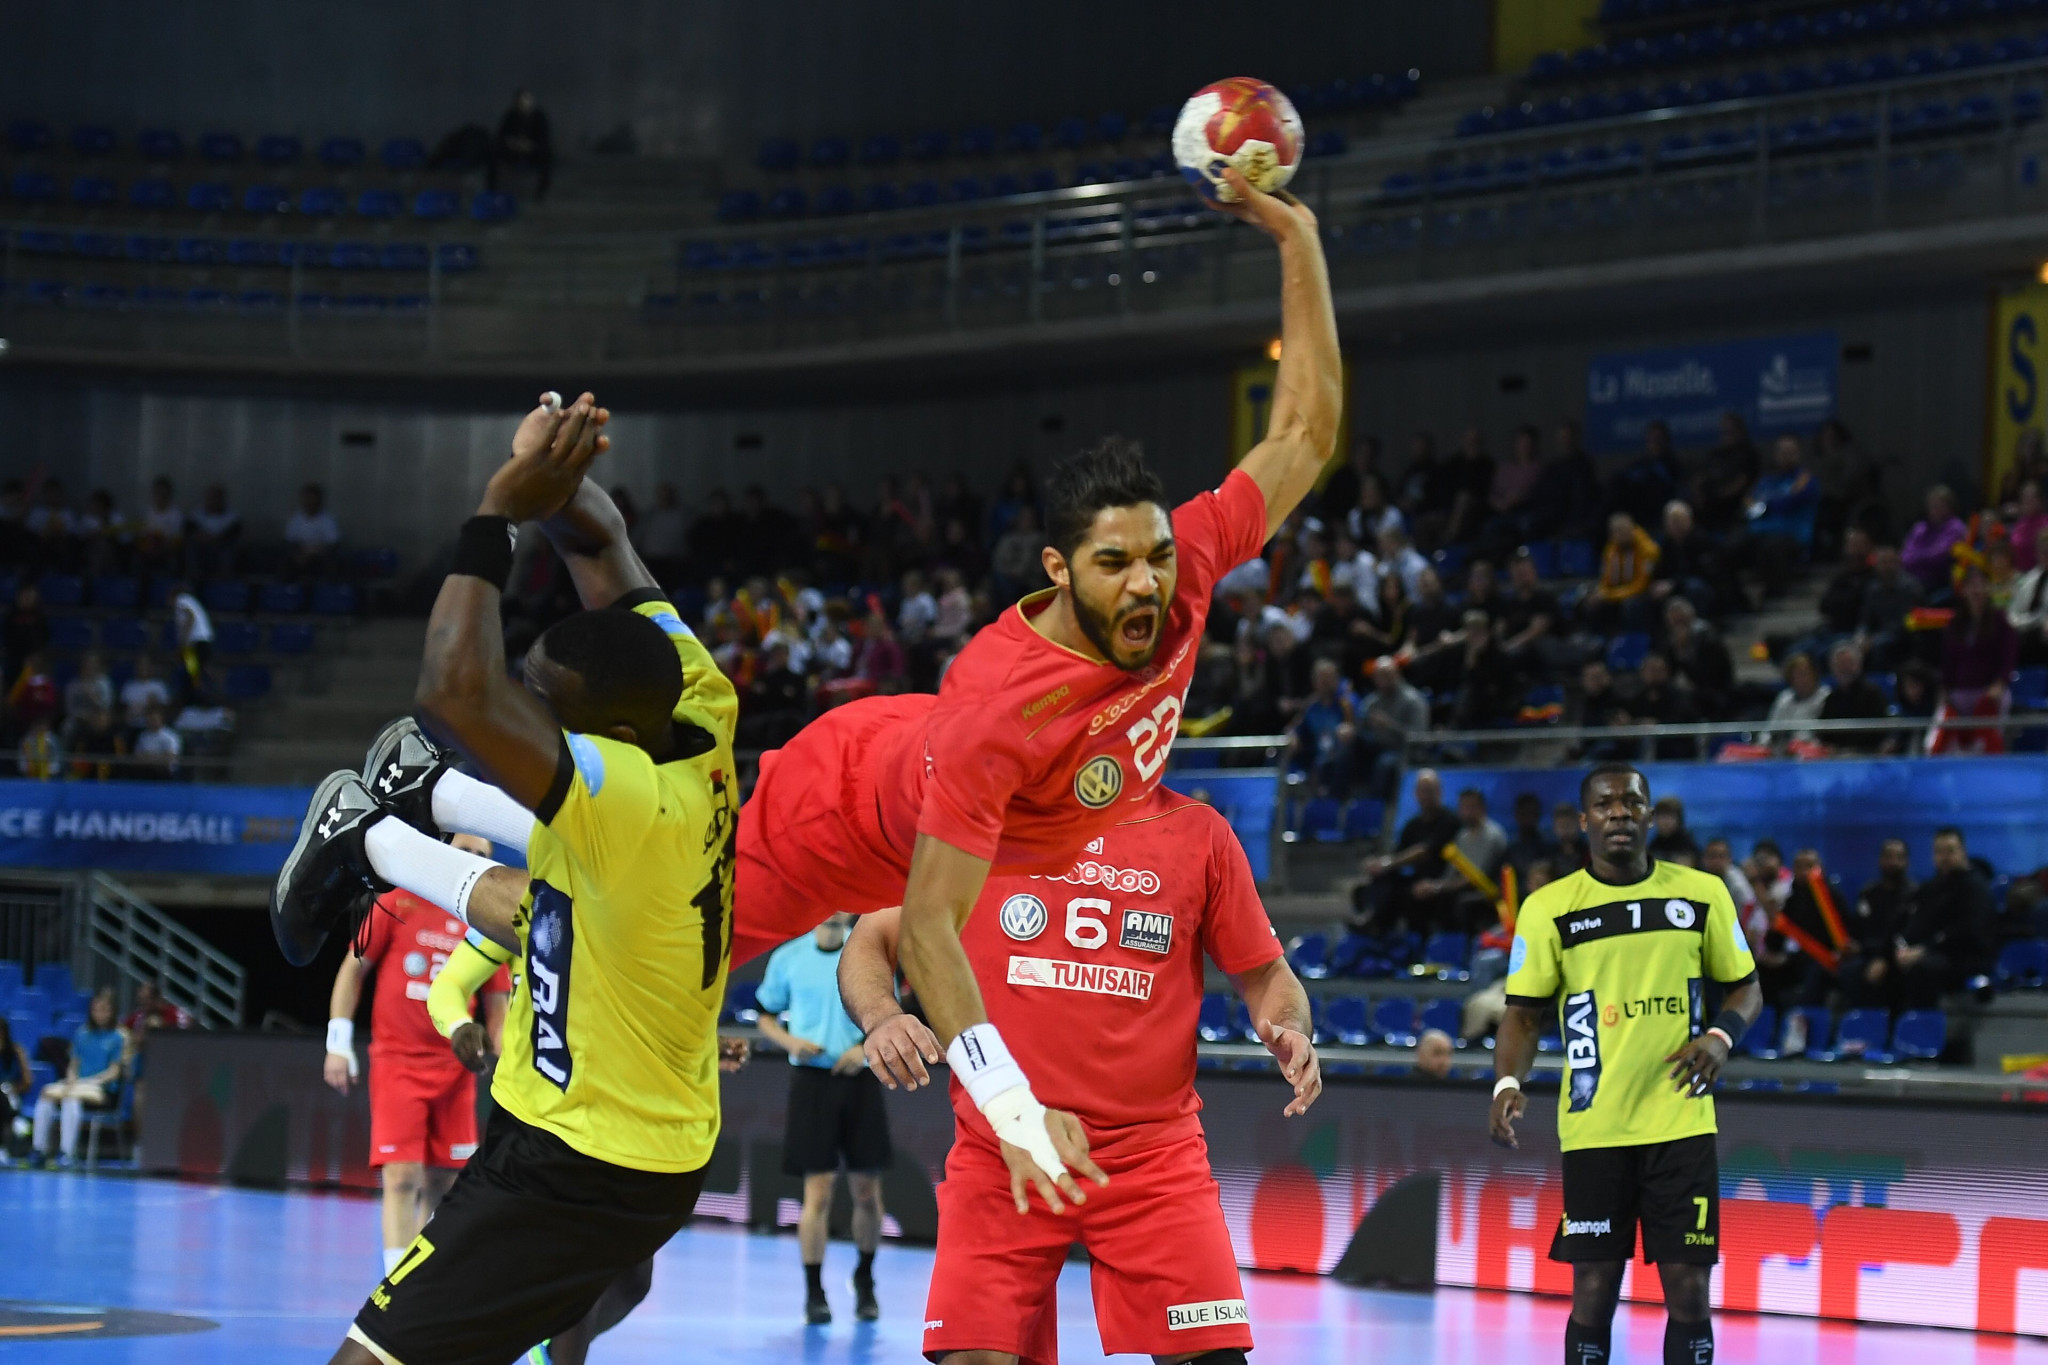 Tunisia, red, defeated Angola, yellow, in last year's World Championship in France ©Getty Images